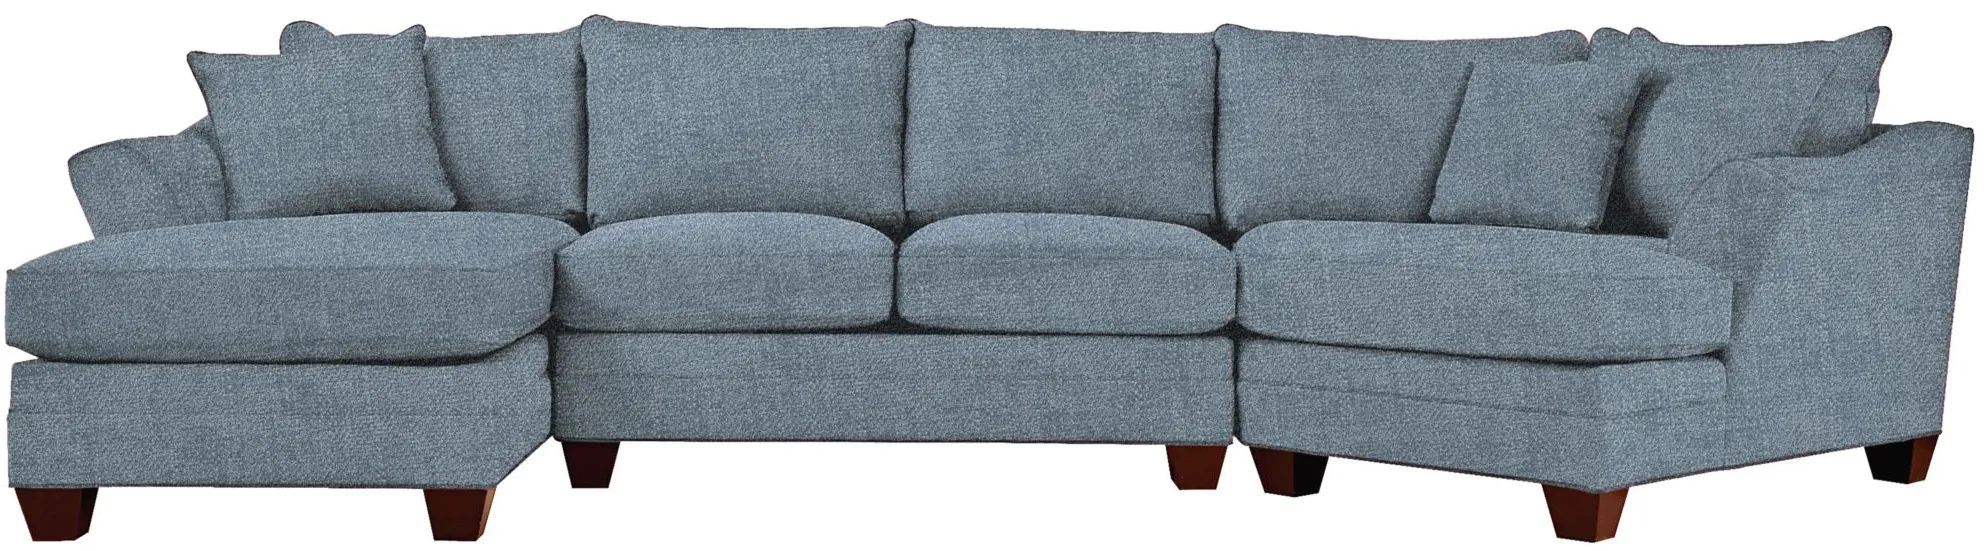 Foresthill 3-pc. Left Hand Facing Sectional Sofa in Elliot French Blue by H.M. Richards